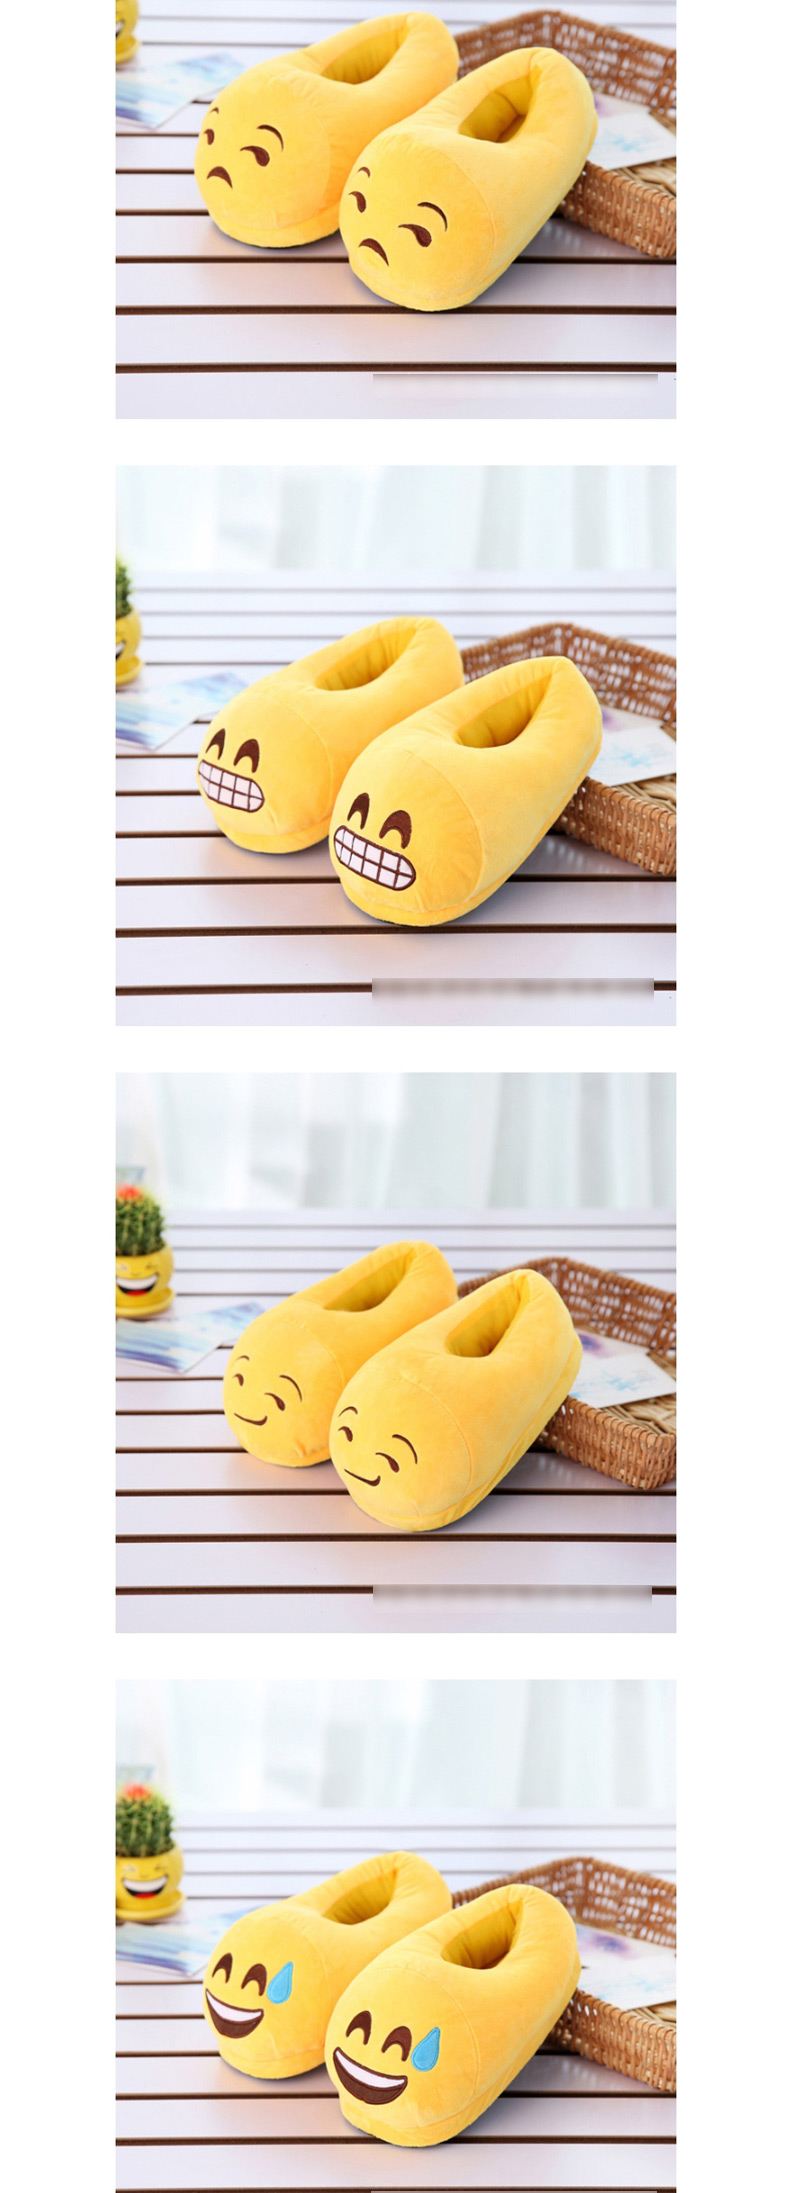 Fashion 17 Yellow Cartoon Expression Plush Bag With Cotton Slippers,Slippers